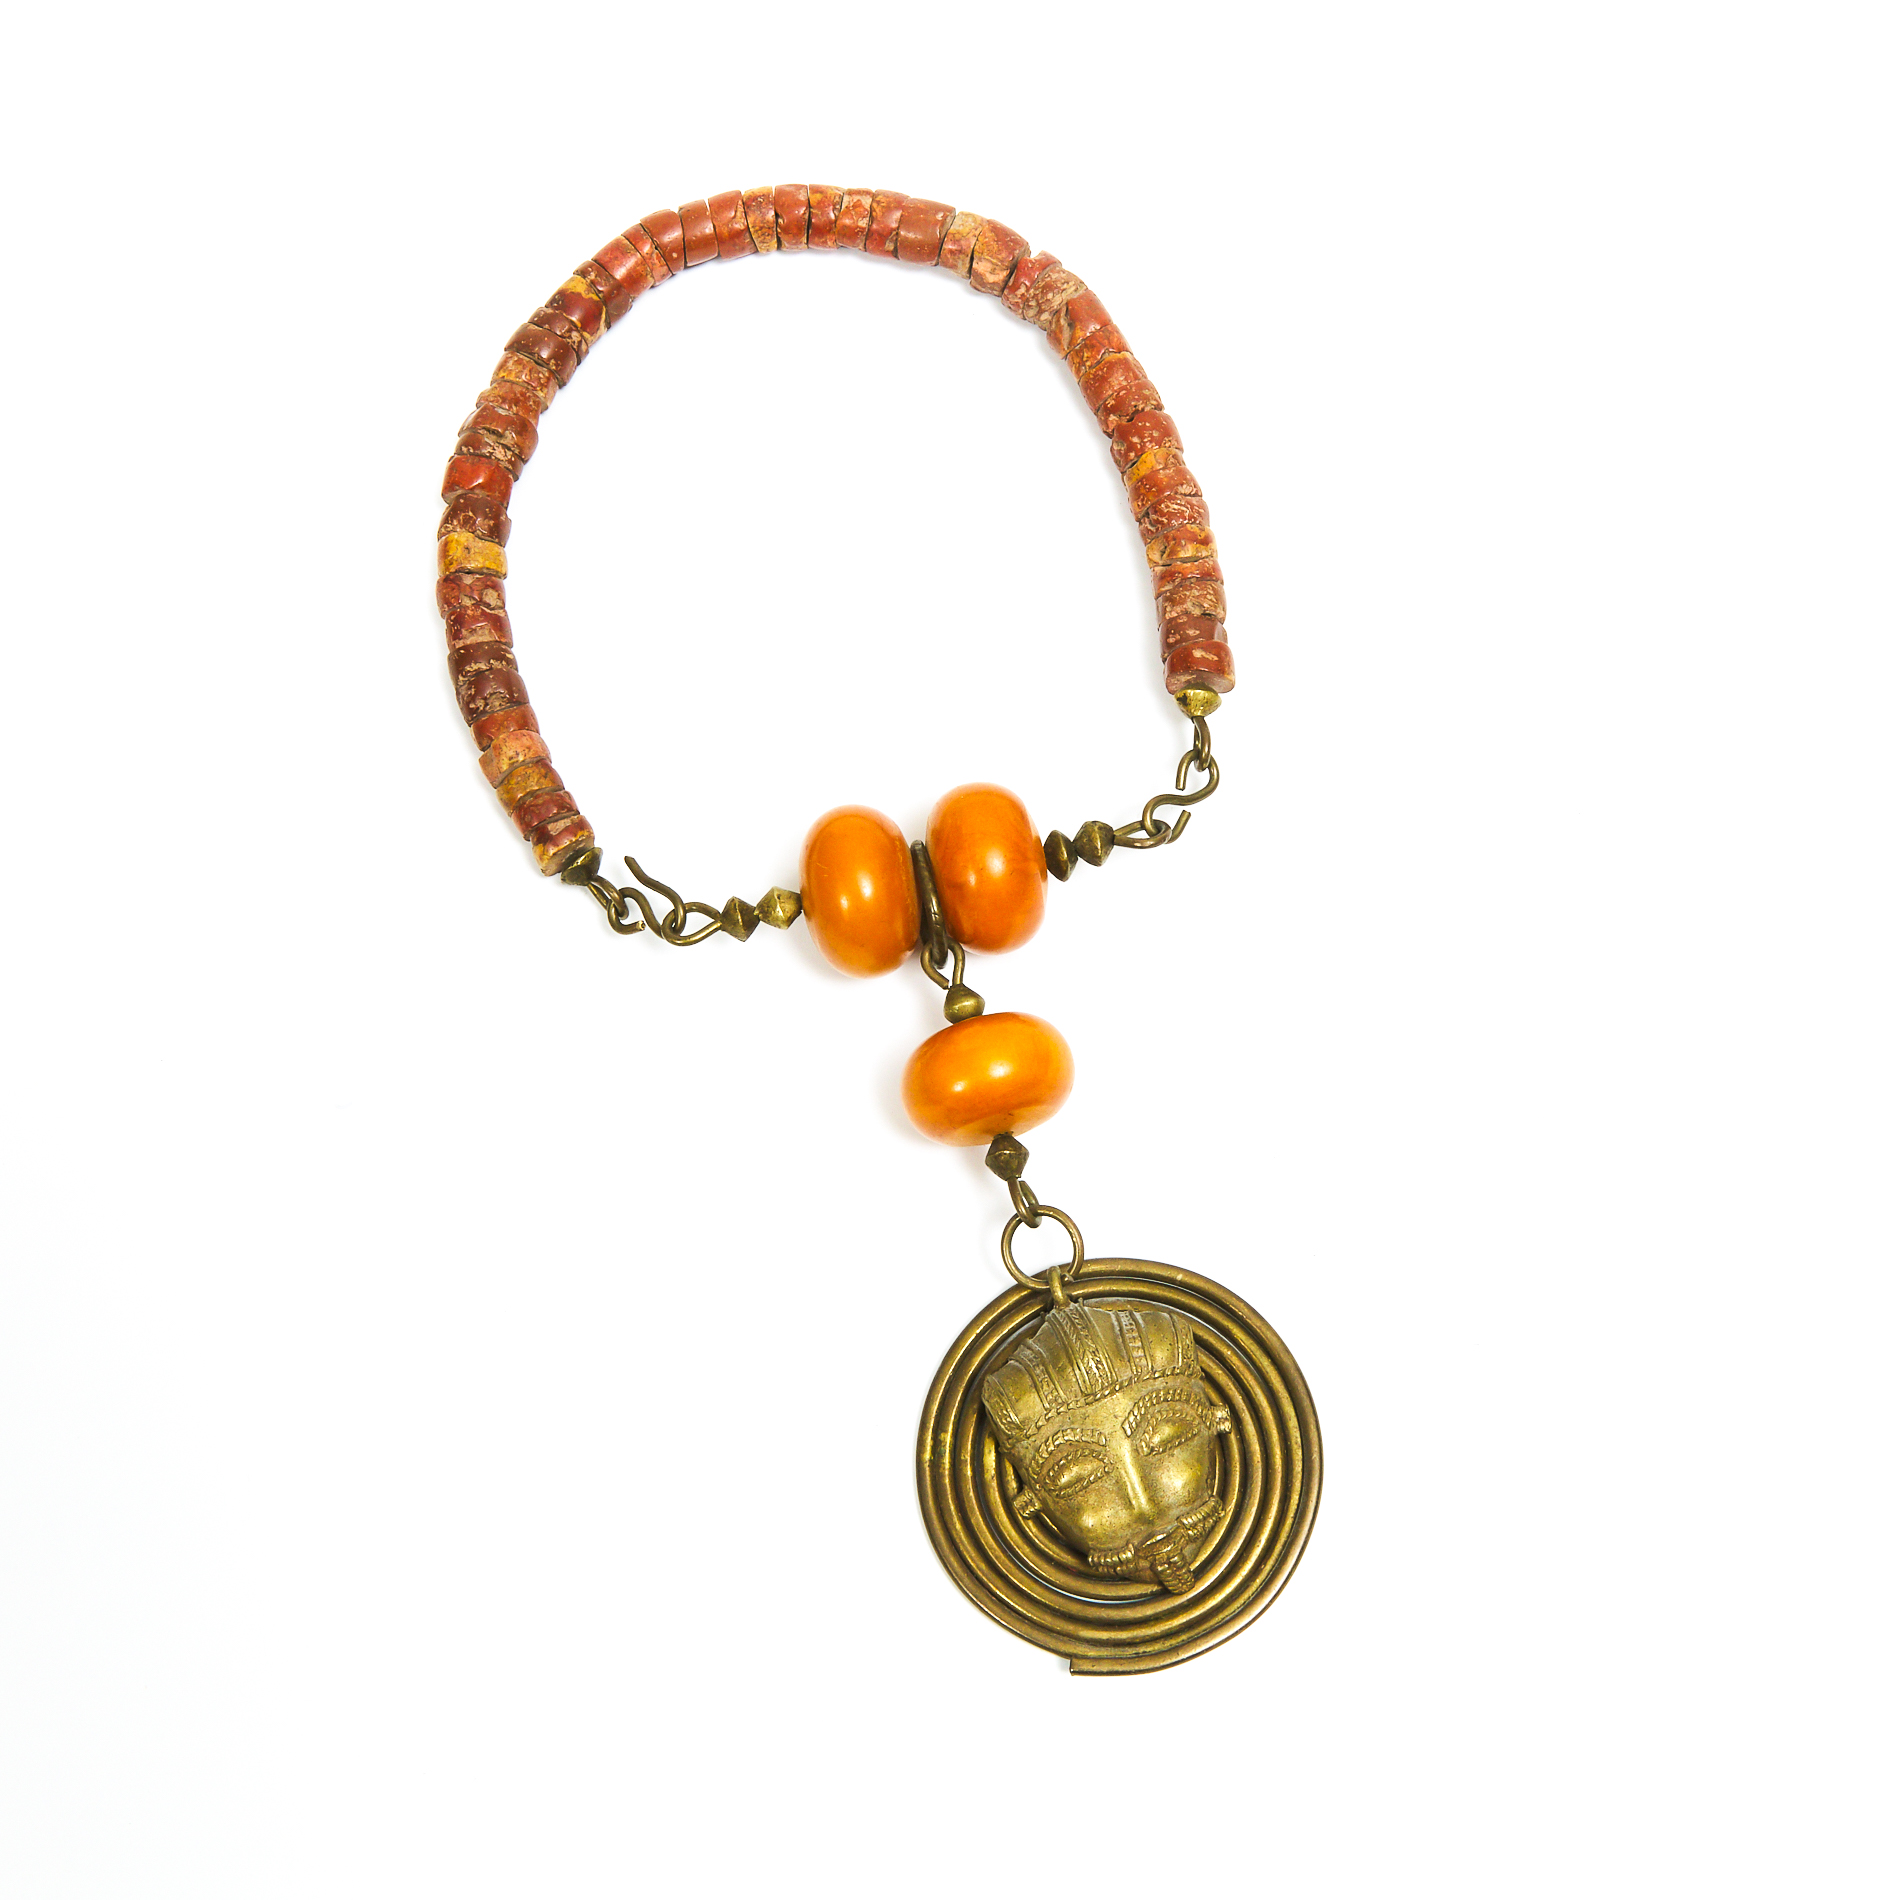 Ashanti Pressed Amber and Stone Bead Necklace, 20th century